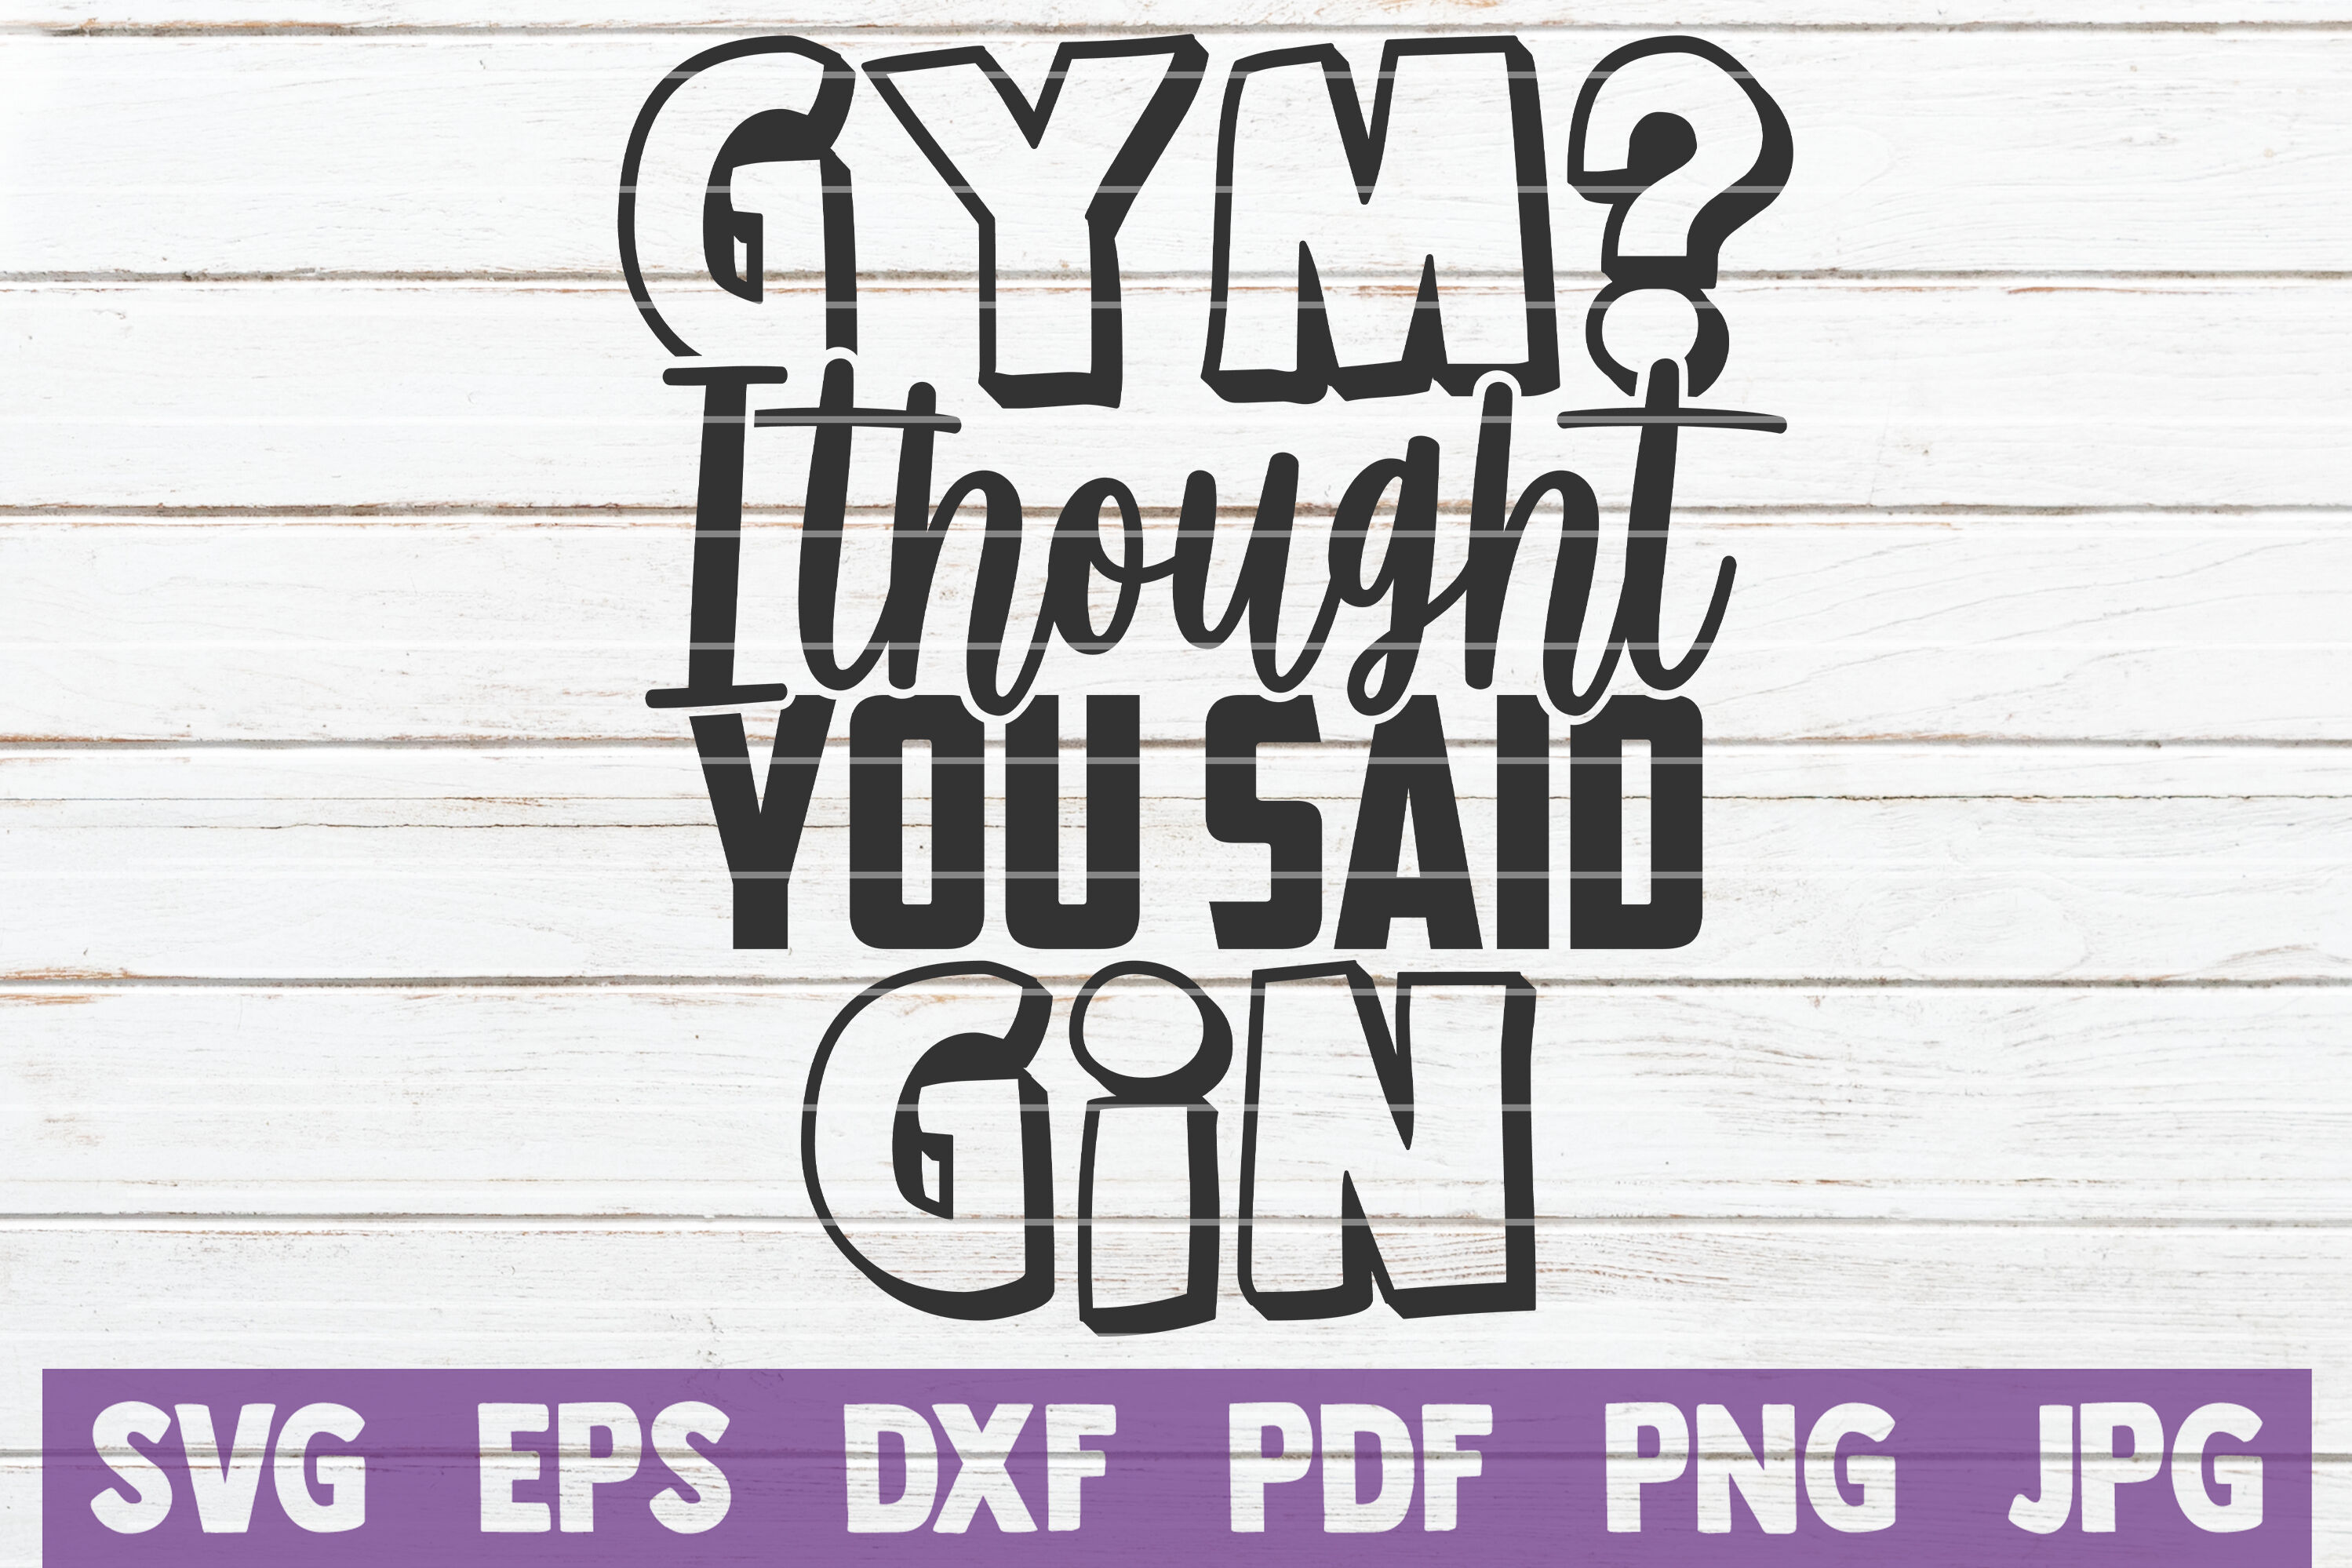 Gym I thought you said Gin stock vector. Illustration of card